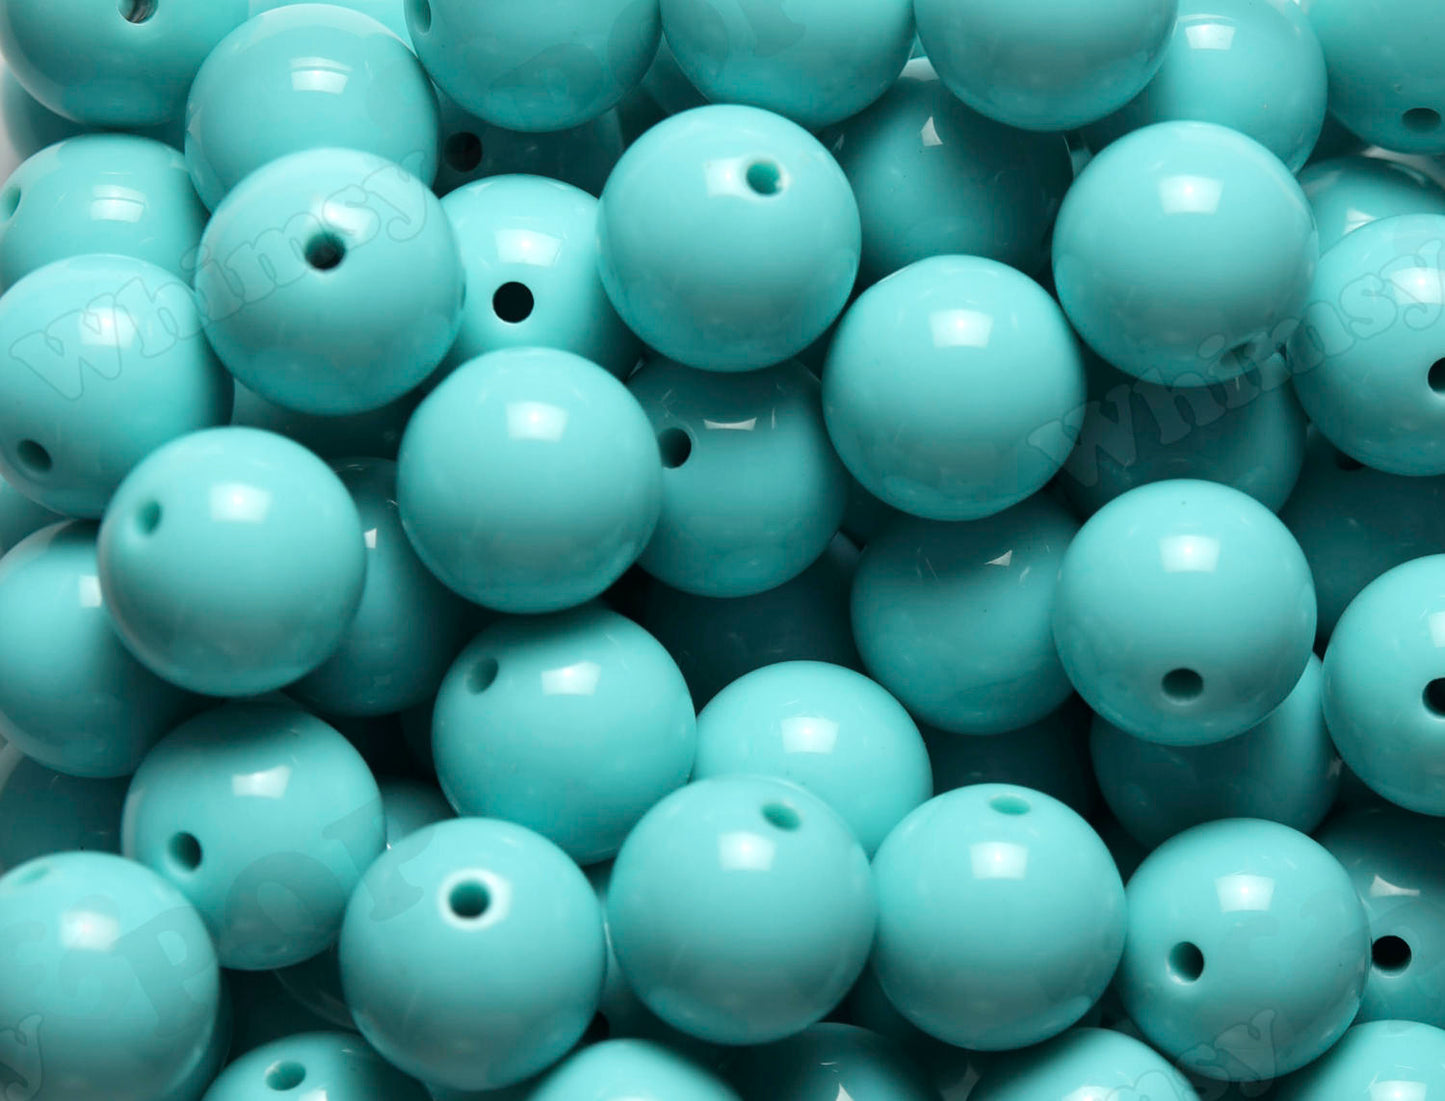 Mint Green 20mm Solid Bubblegum Beads for DIY Jewelry by WhimsyandPOP